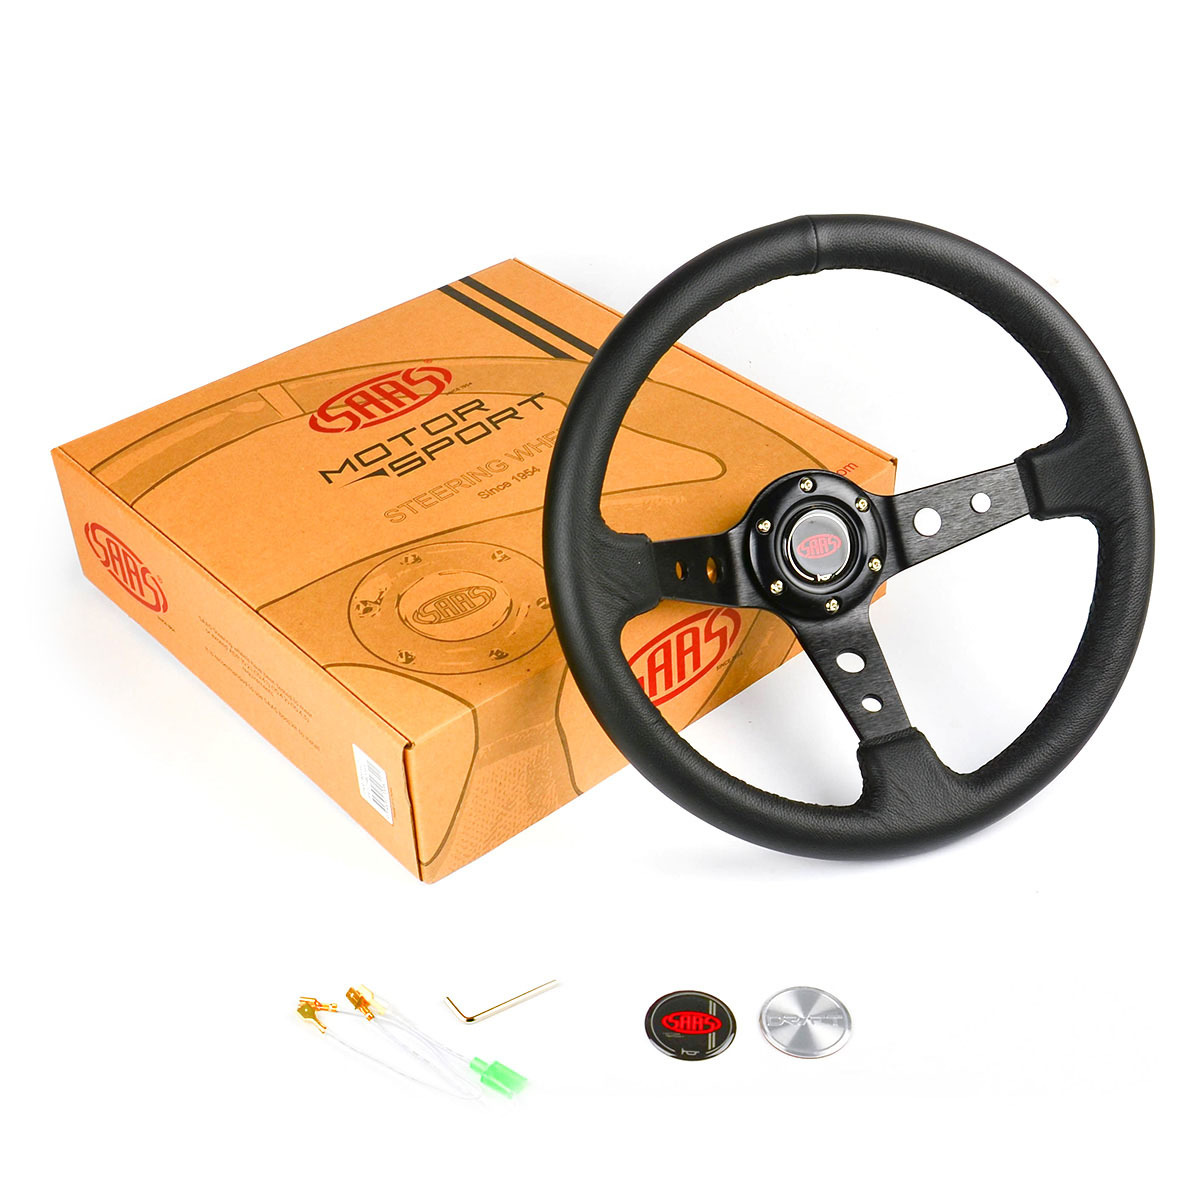 Steering Wheel Leather 14" ADR GT Deep Dish Black With Holes